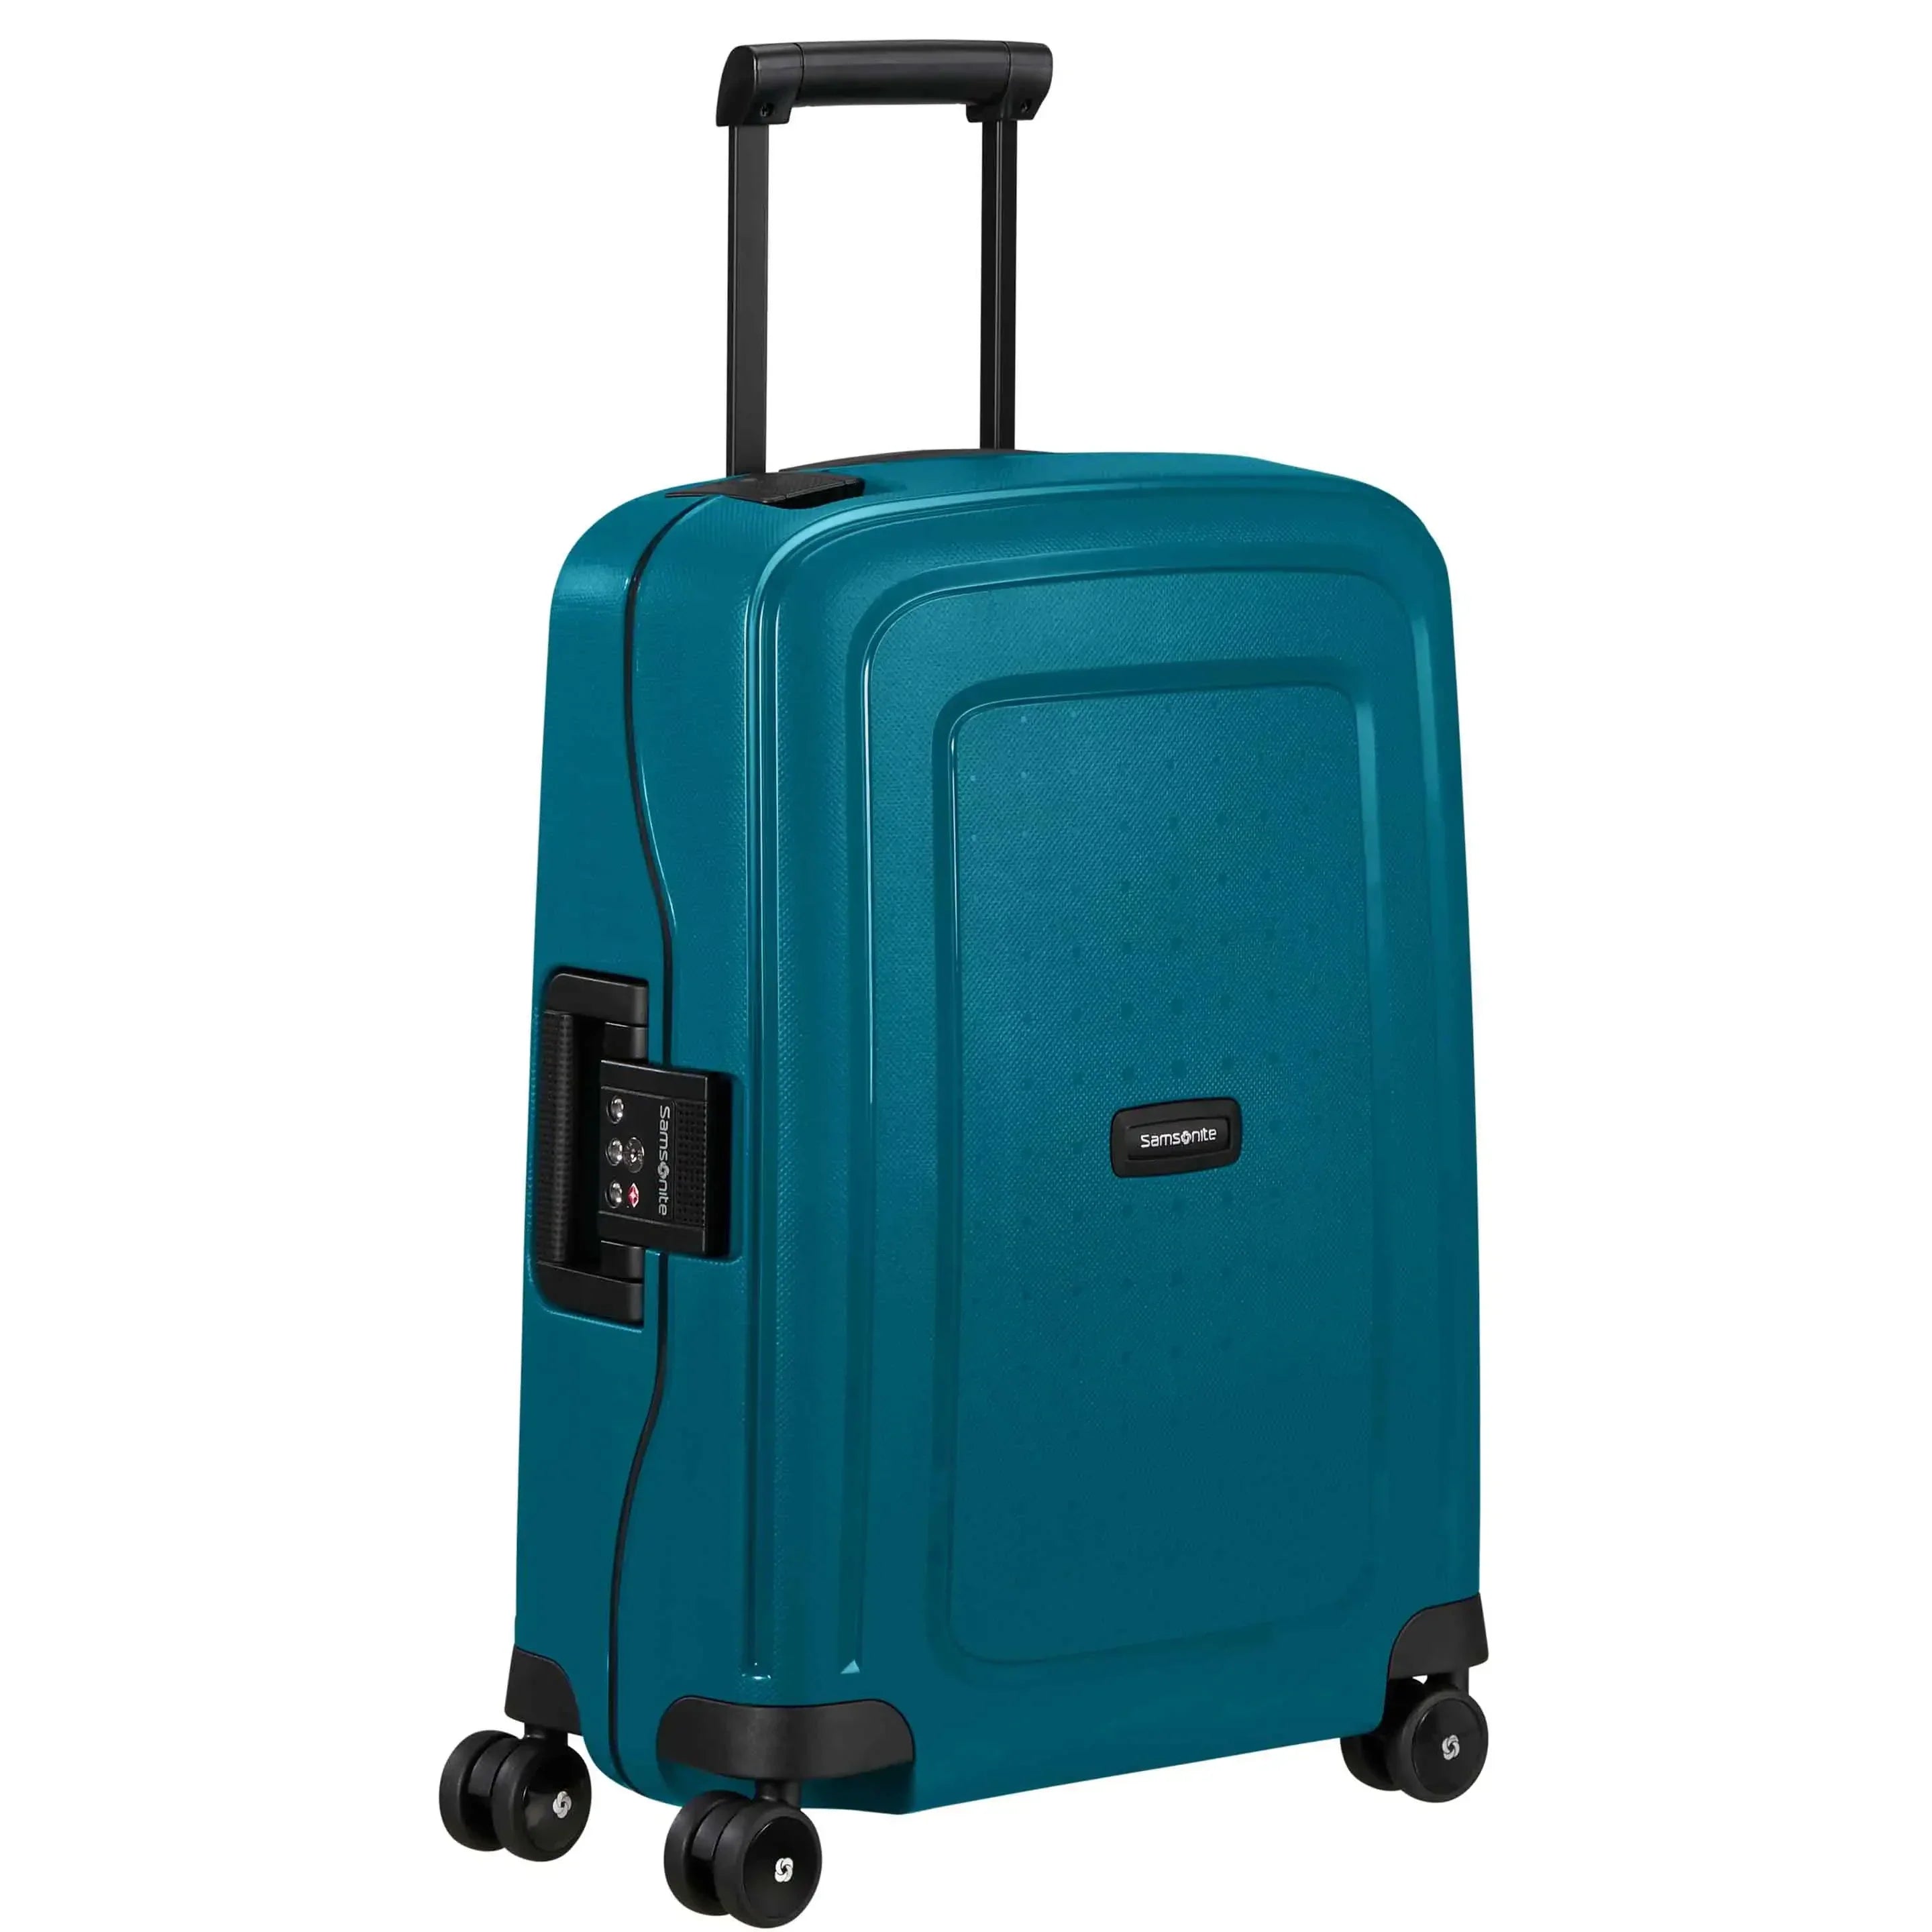 Samsonite 2 right – luggage from The Page